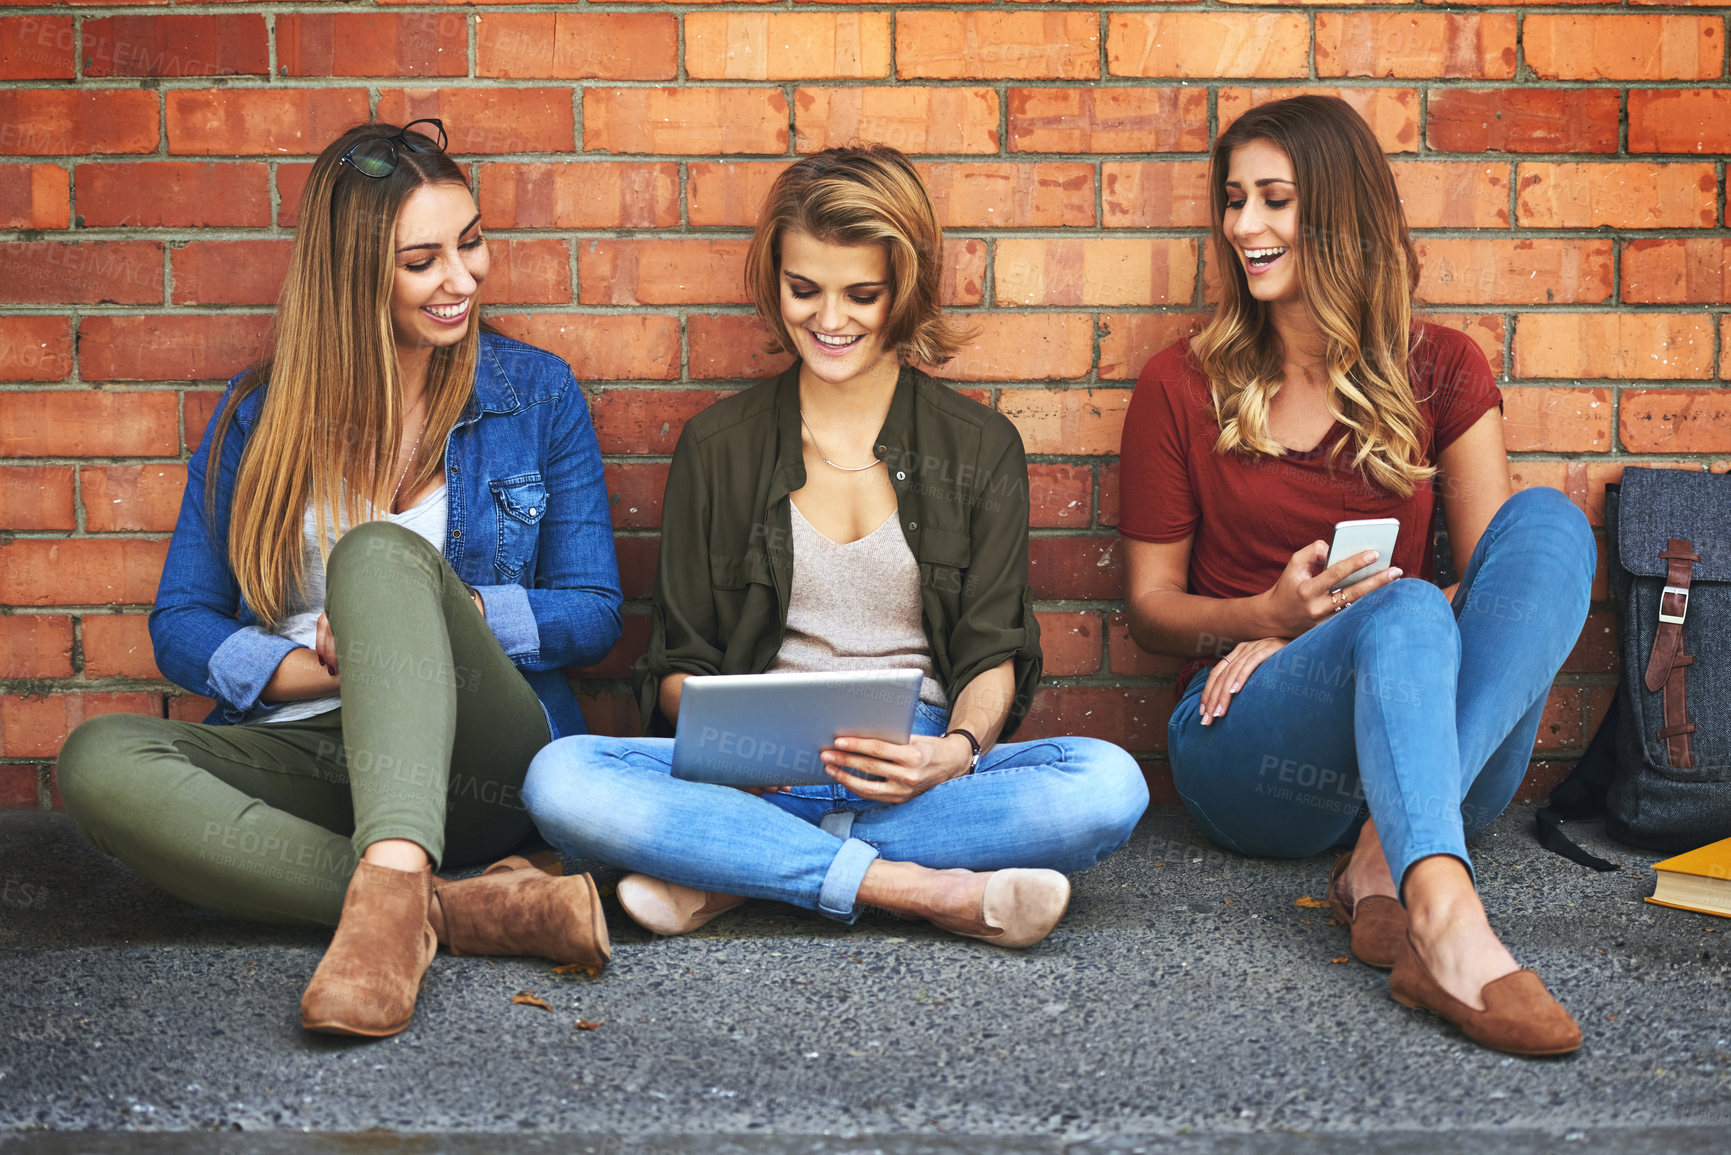 Buy stock photo Shot of three smiling female university students sitting together outside on campus using a digital tablet